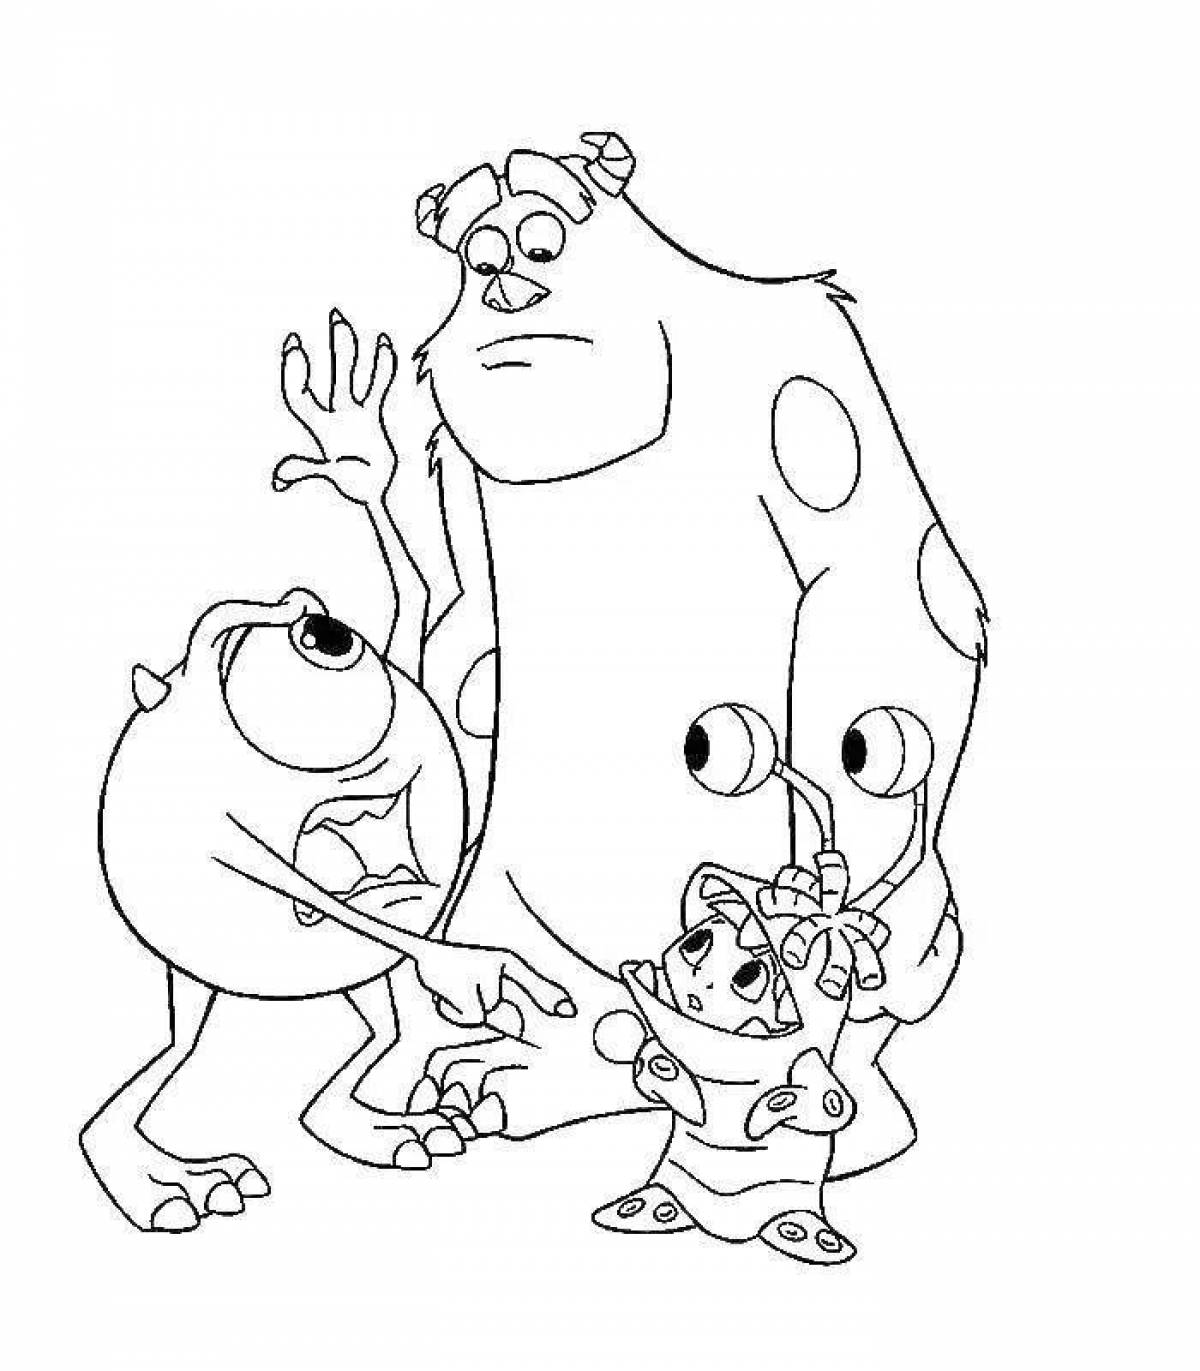 Magic date coloring page